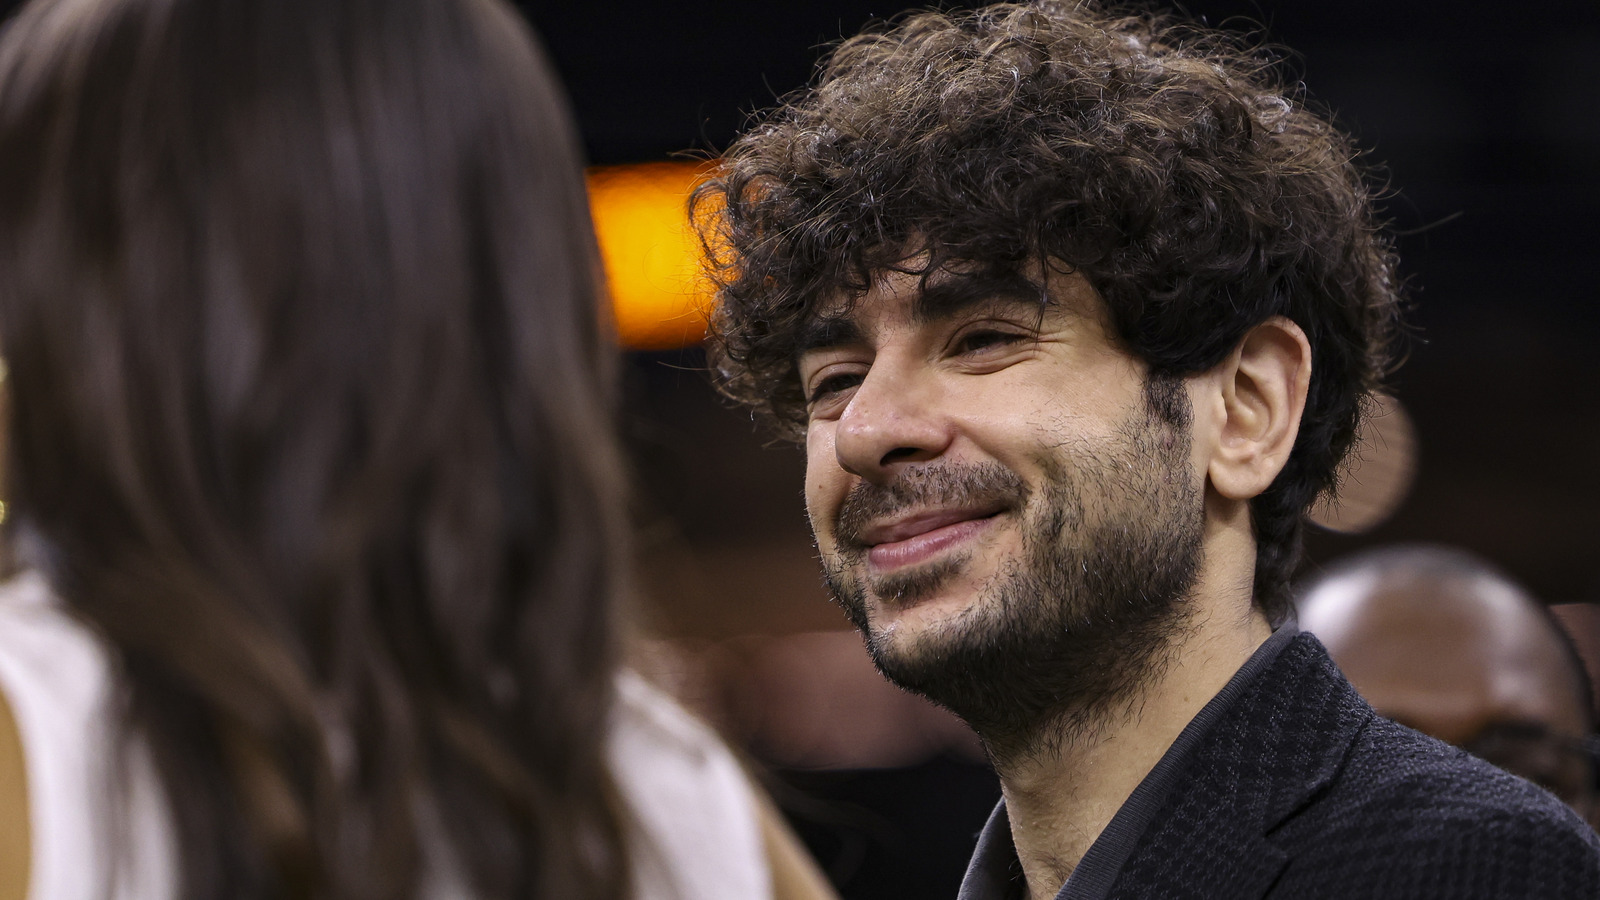 AEW's Tony Khan Donating Neck Brace To Charity After Prompting By NFL's Rich Eisen